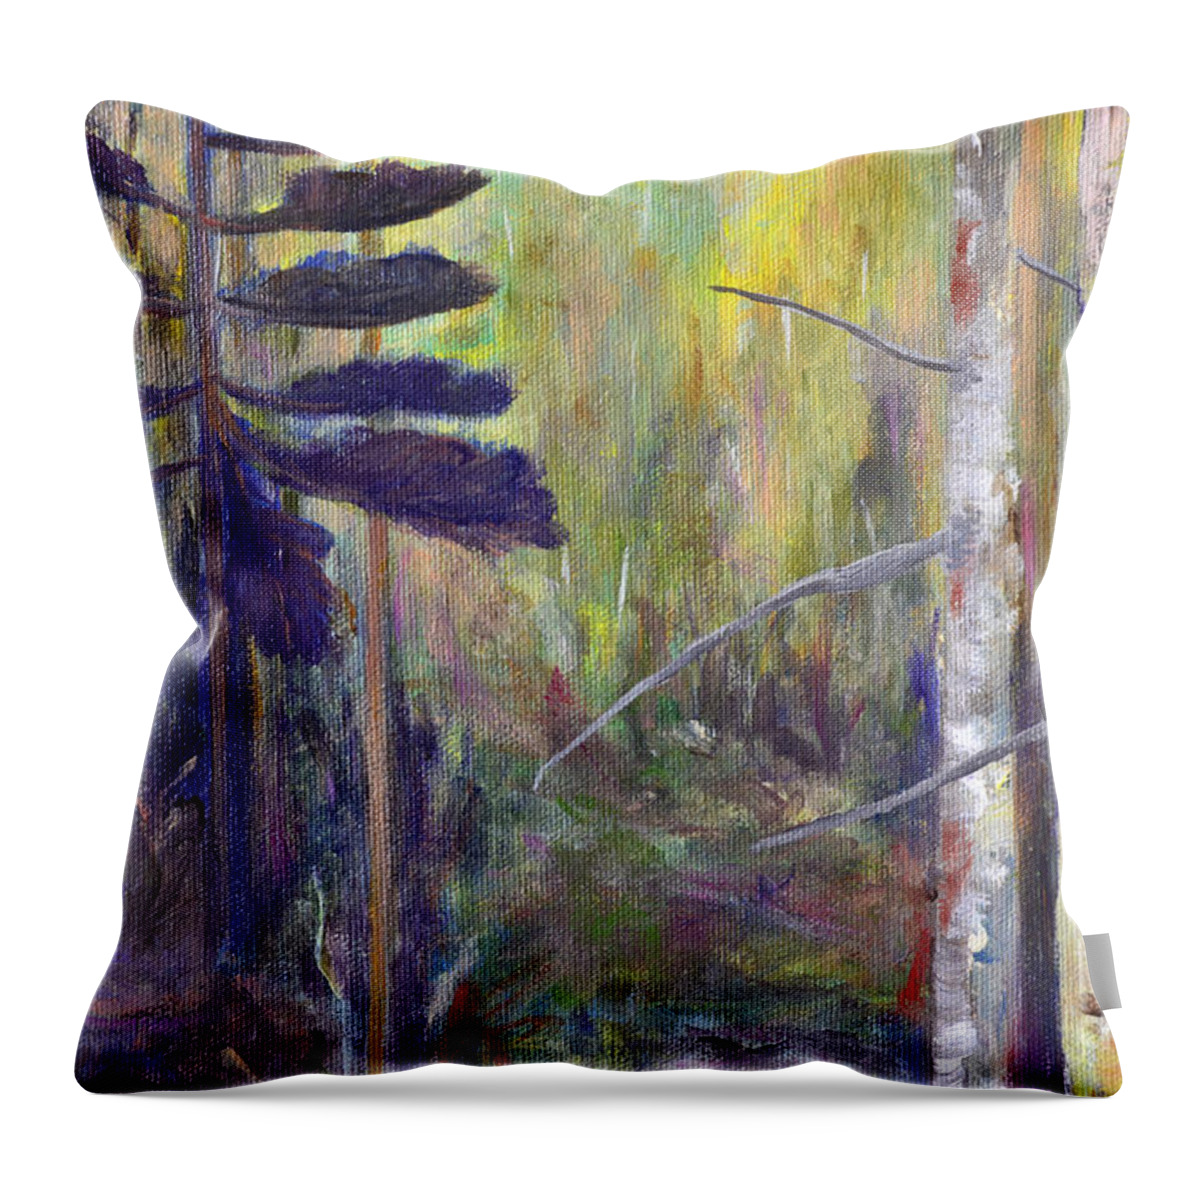 Woods Throw Pillow featuring the painting Forest Wonders by Claire Bull